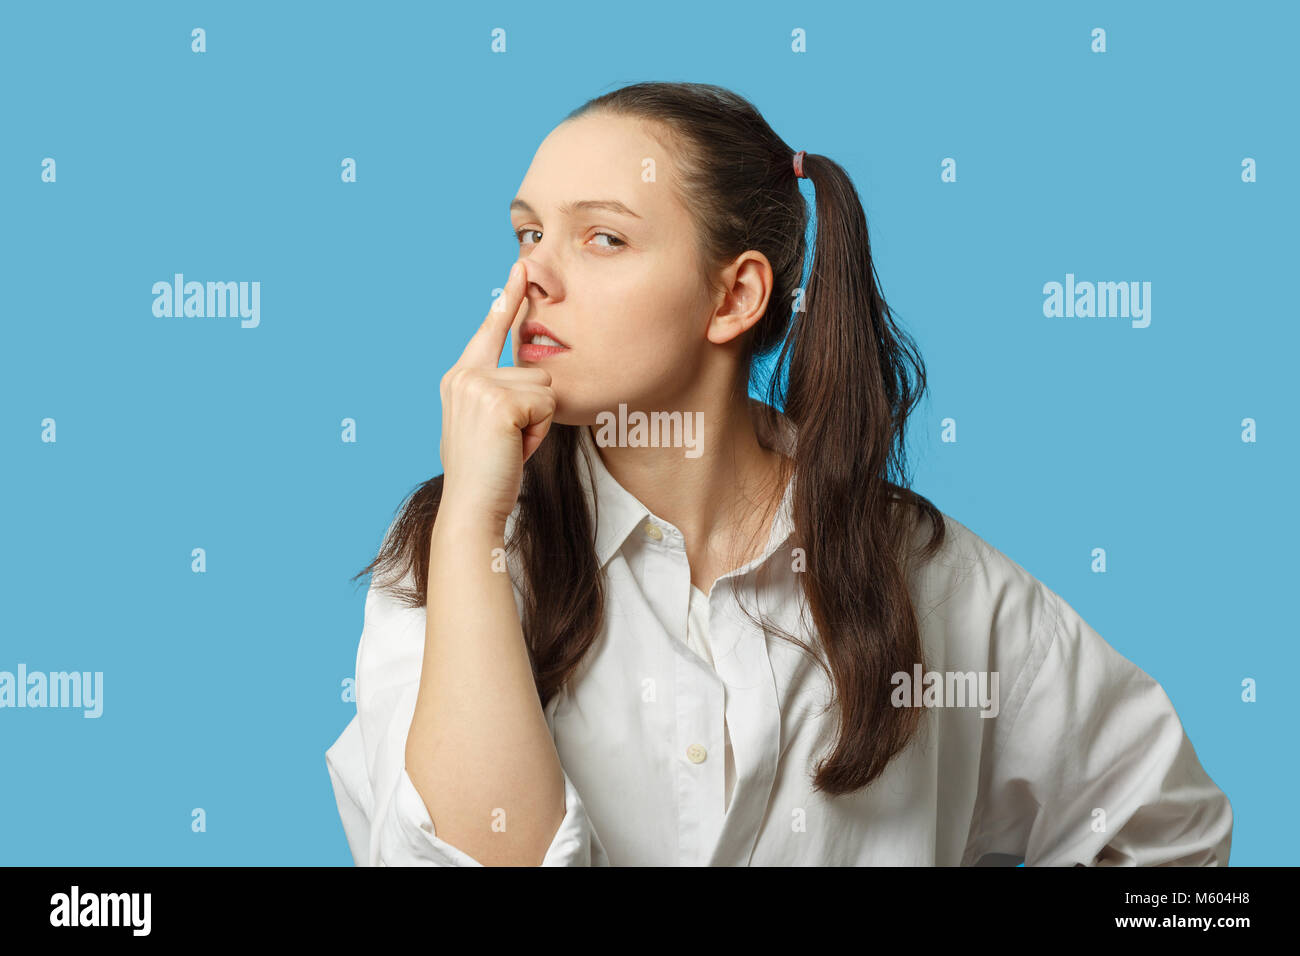 fun girl on blue background show pig snout gesture Stock Photo